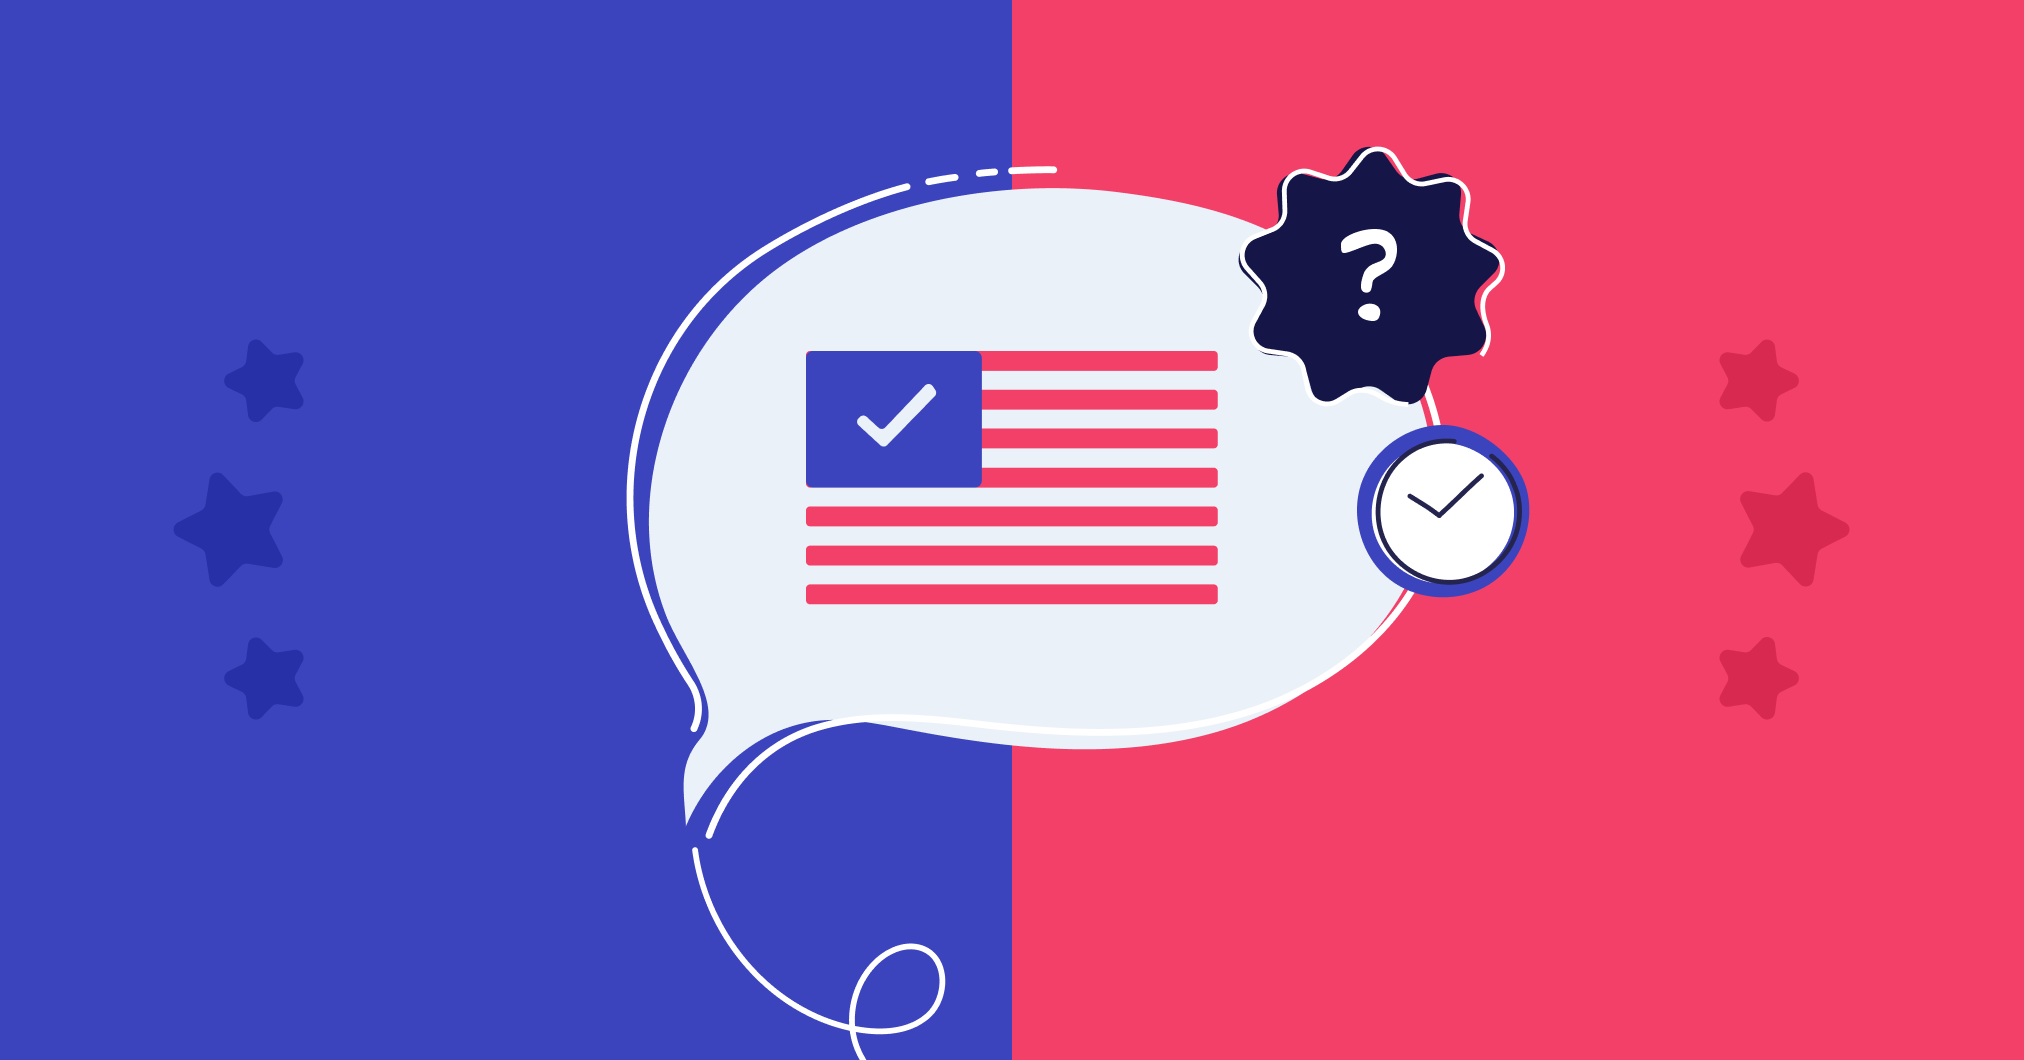 Conversational AI’s Role in the 2020 U.S. Presidential Election and Beyond